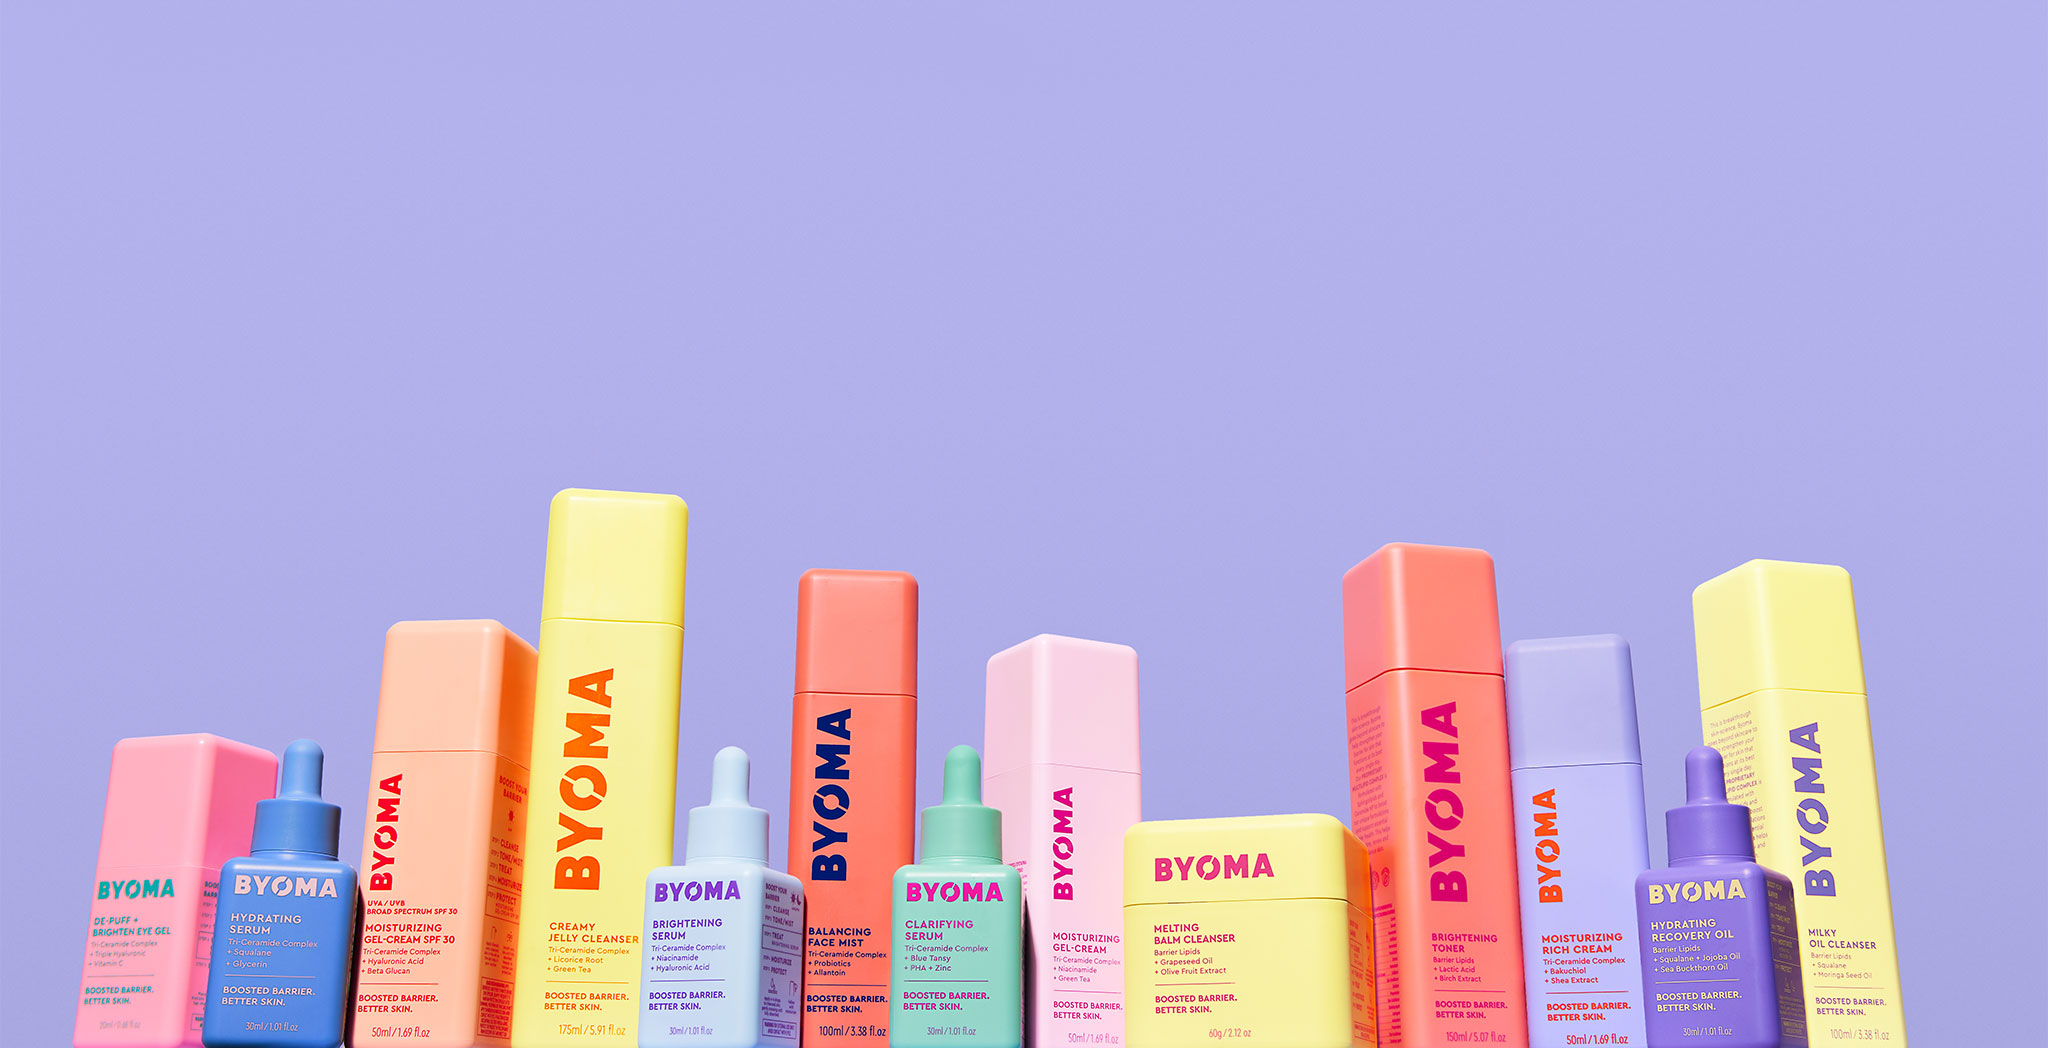 ONE YEAR OLD BYOMA LEADS SKINCARE CATEGORY WITH GROWING BARRIER CARE  LINEUP, CONTINUING MISSION TO MAKE HIGH-PERFORMANCE SKINCARE ACCESSIBLE TO  ALL